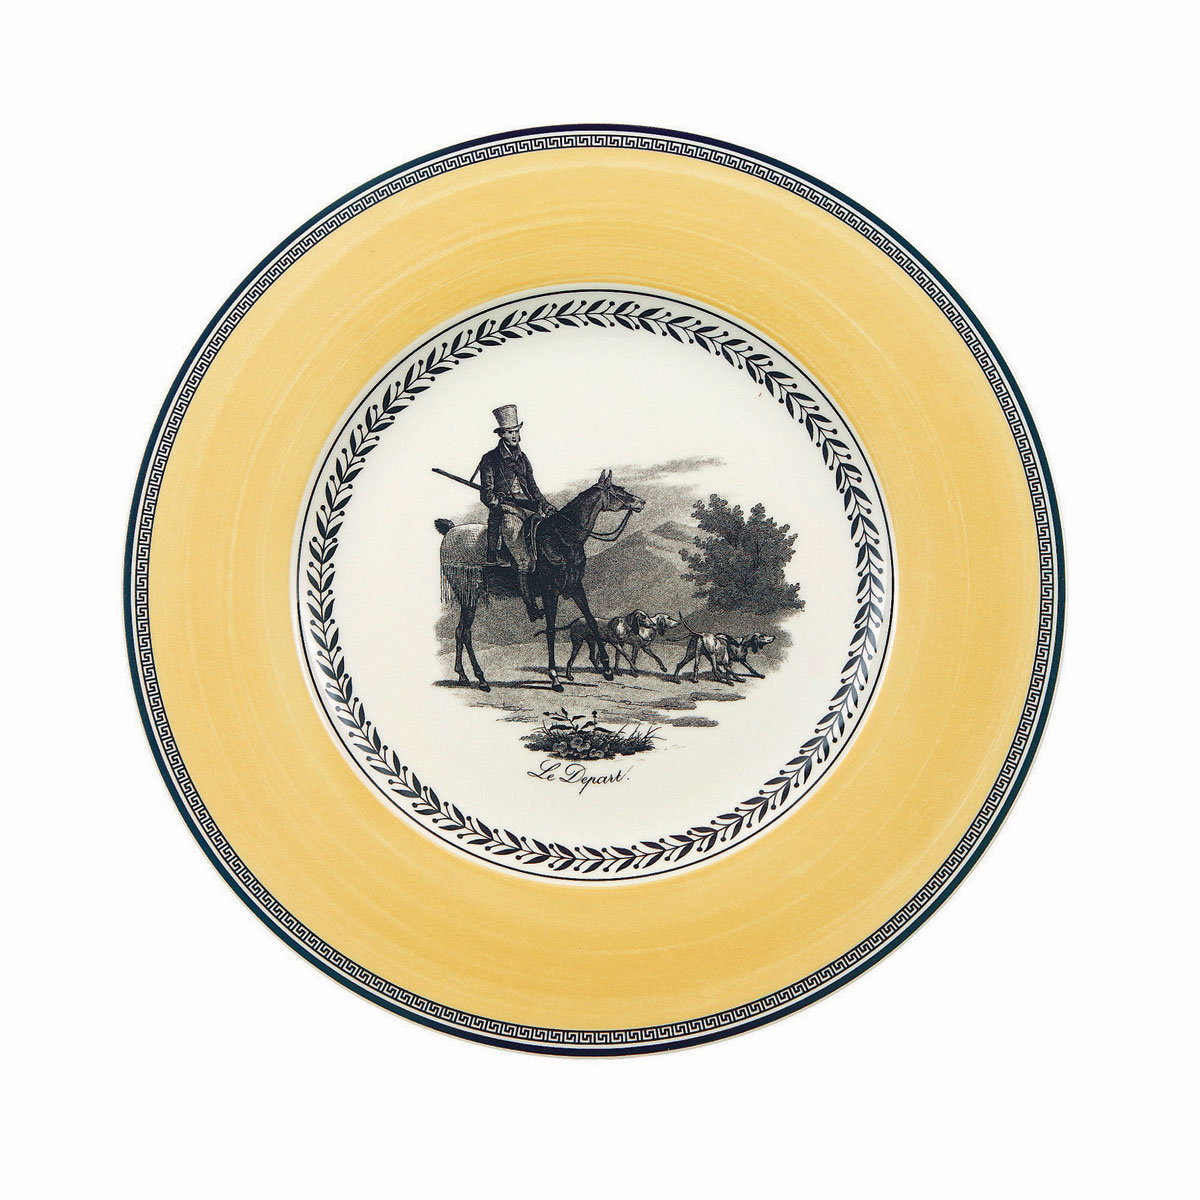 Villeroy and Boch Audun Chasse Dinner Plate